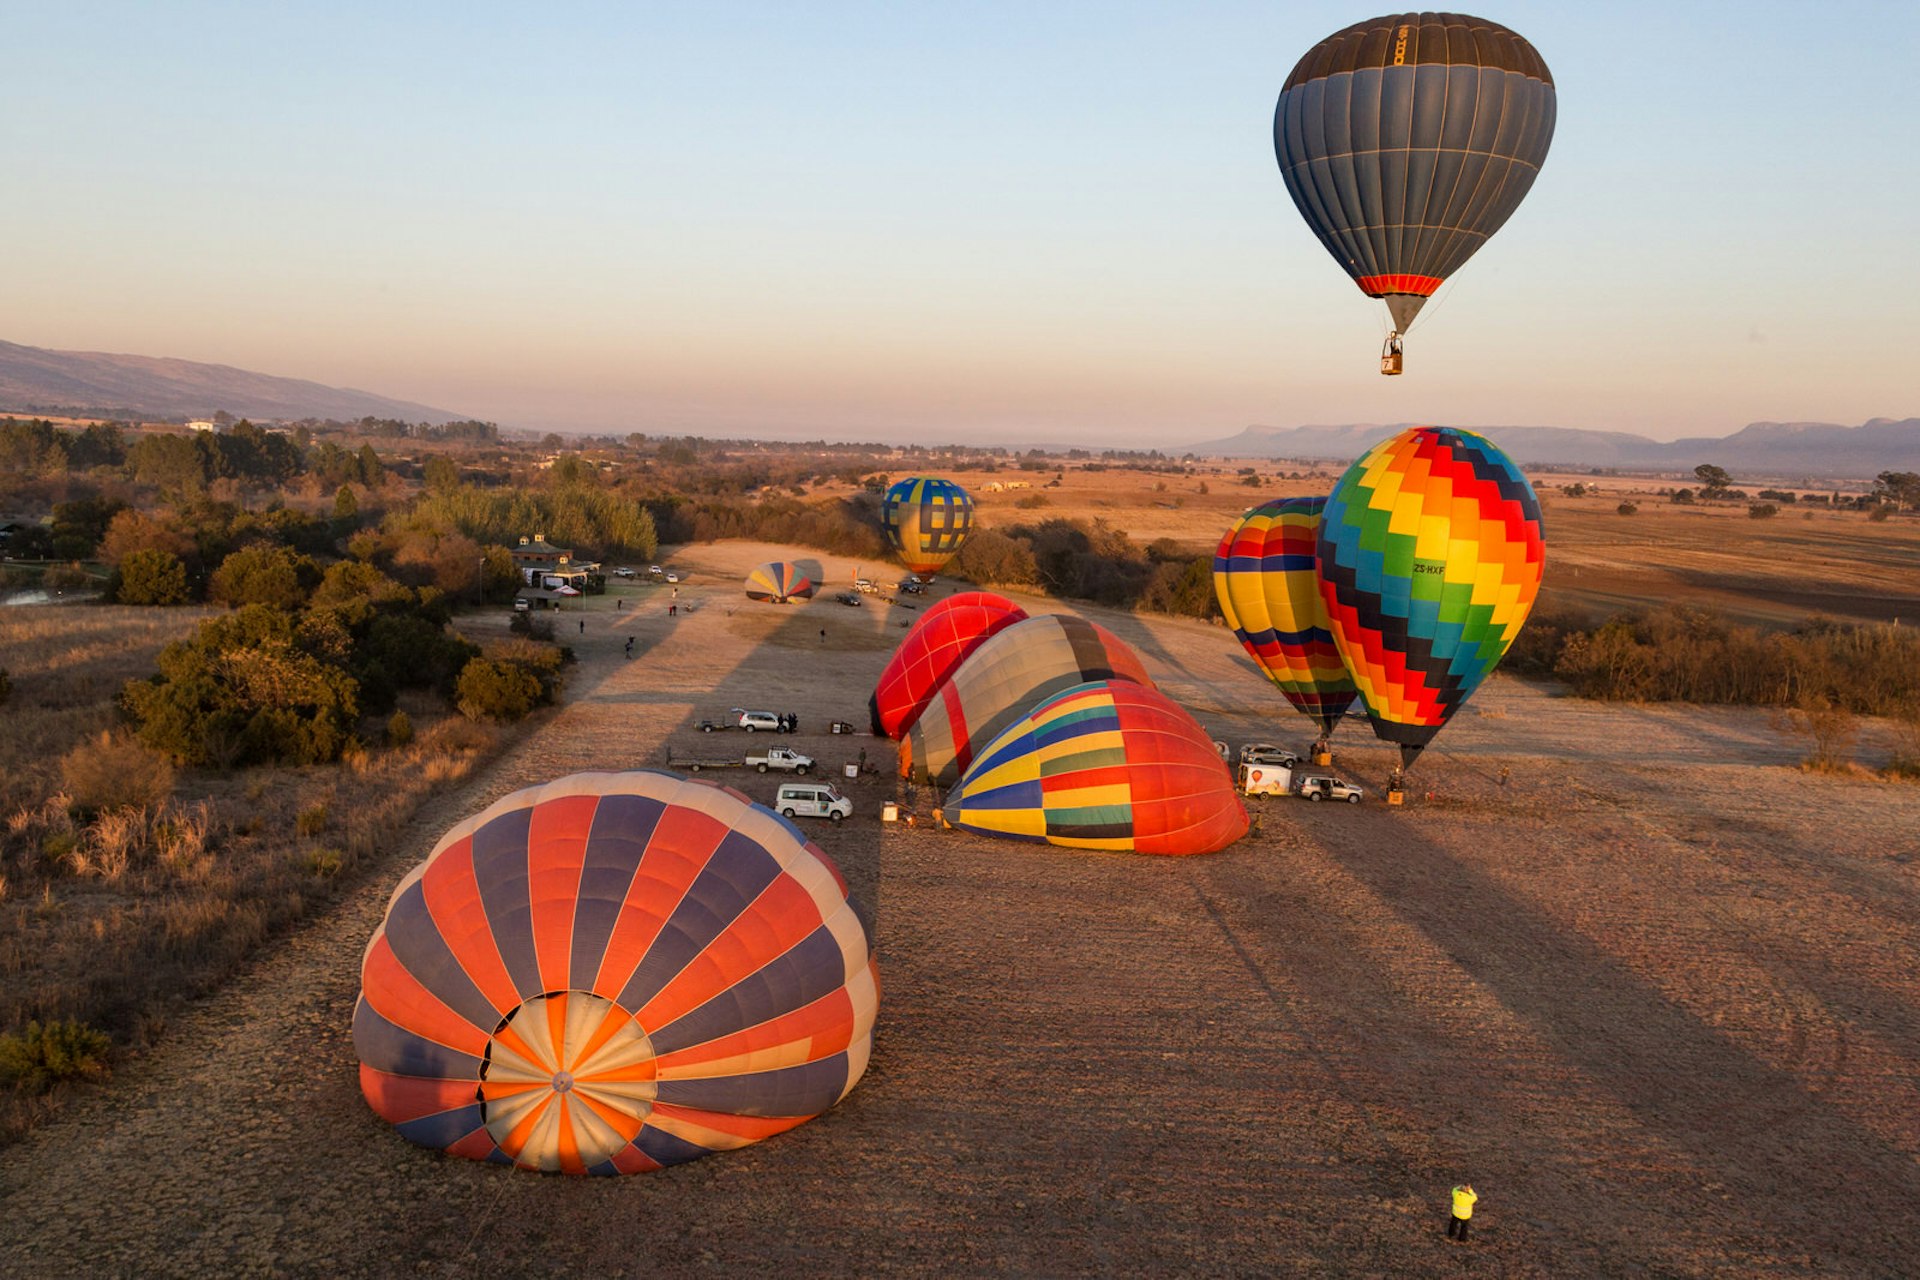 One colourful balloon moves skyward as eight others are in various stages of inflation on the ground; the light is soft and golden due to sunrise